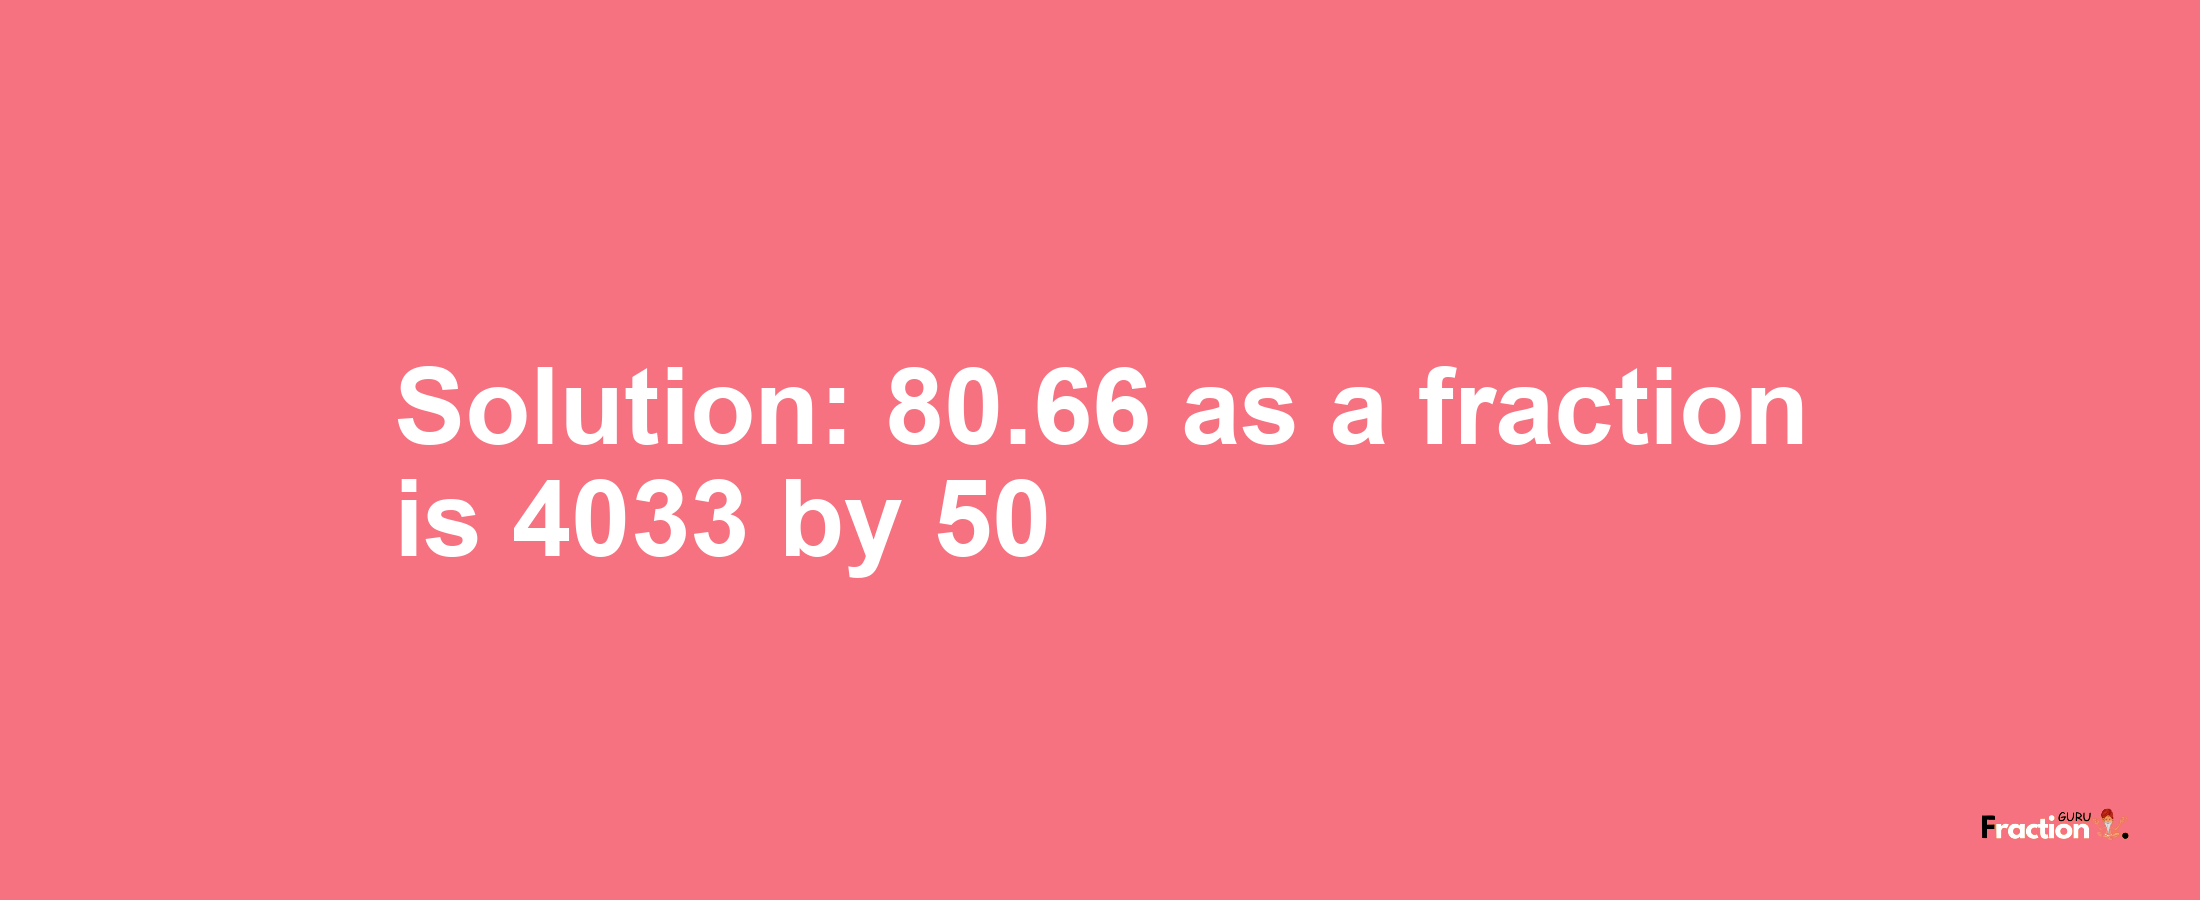 Solution:80.66 as a fraction is 4033/50